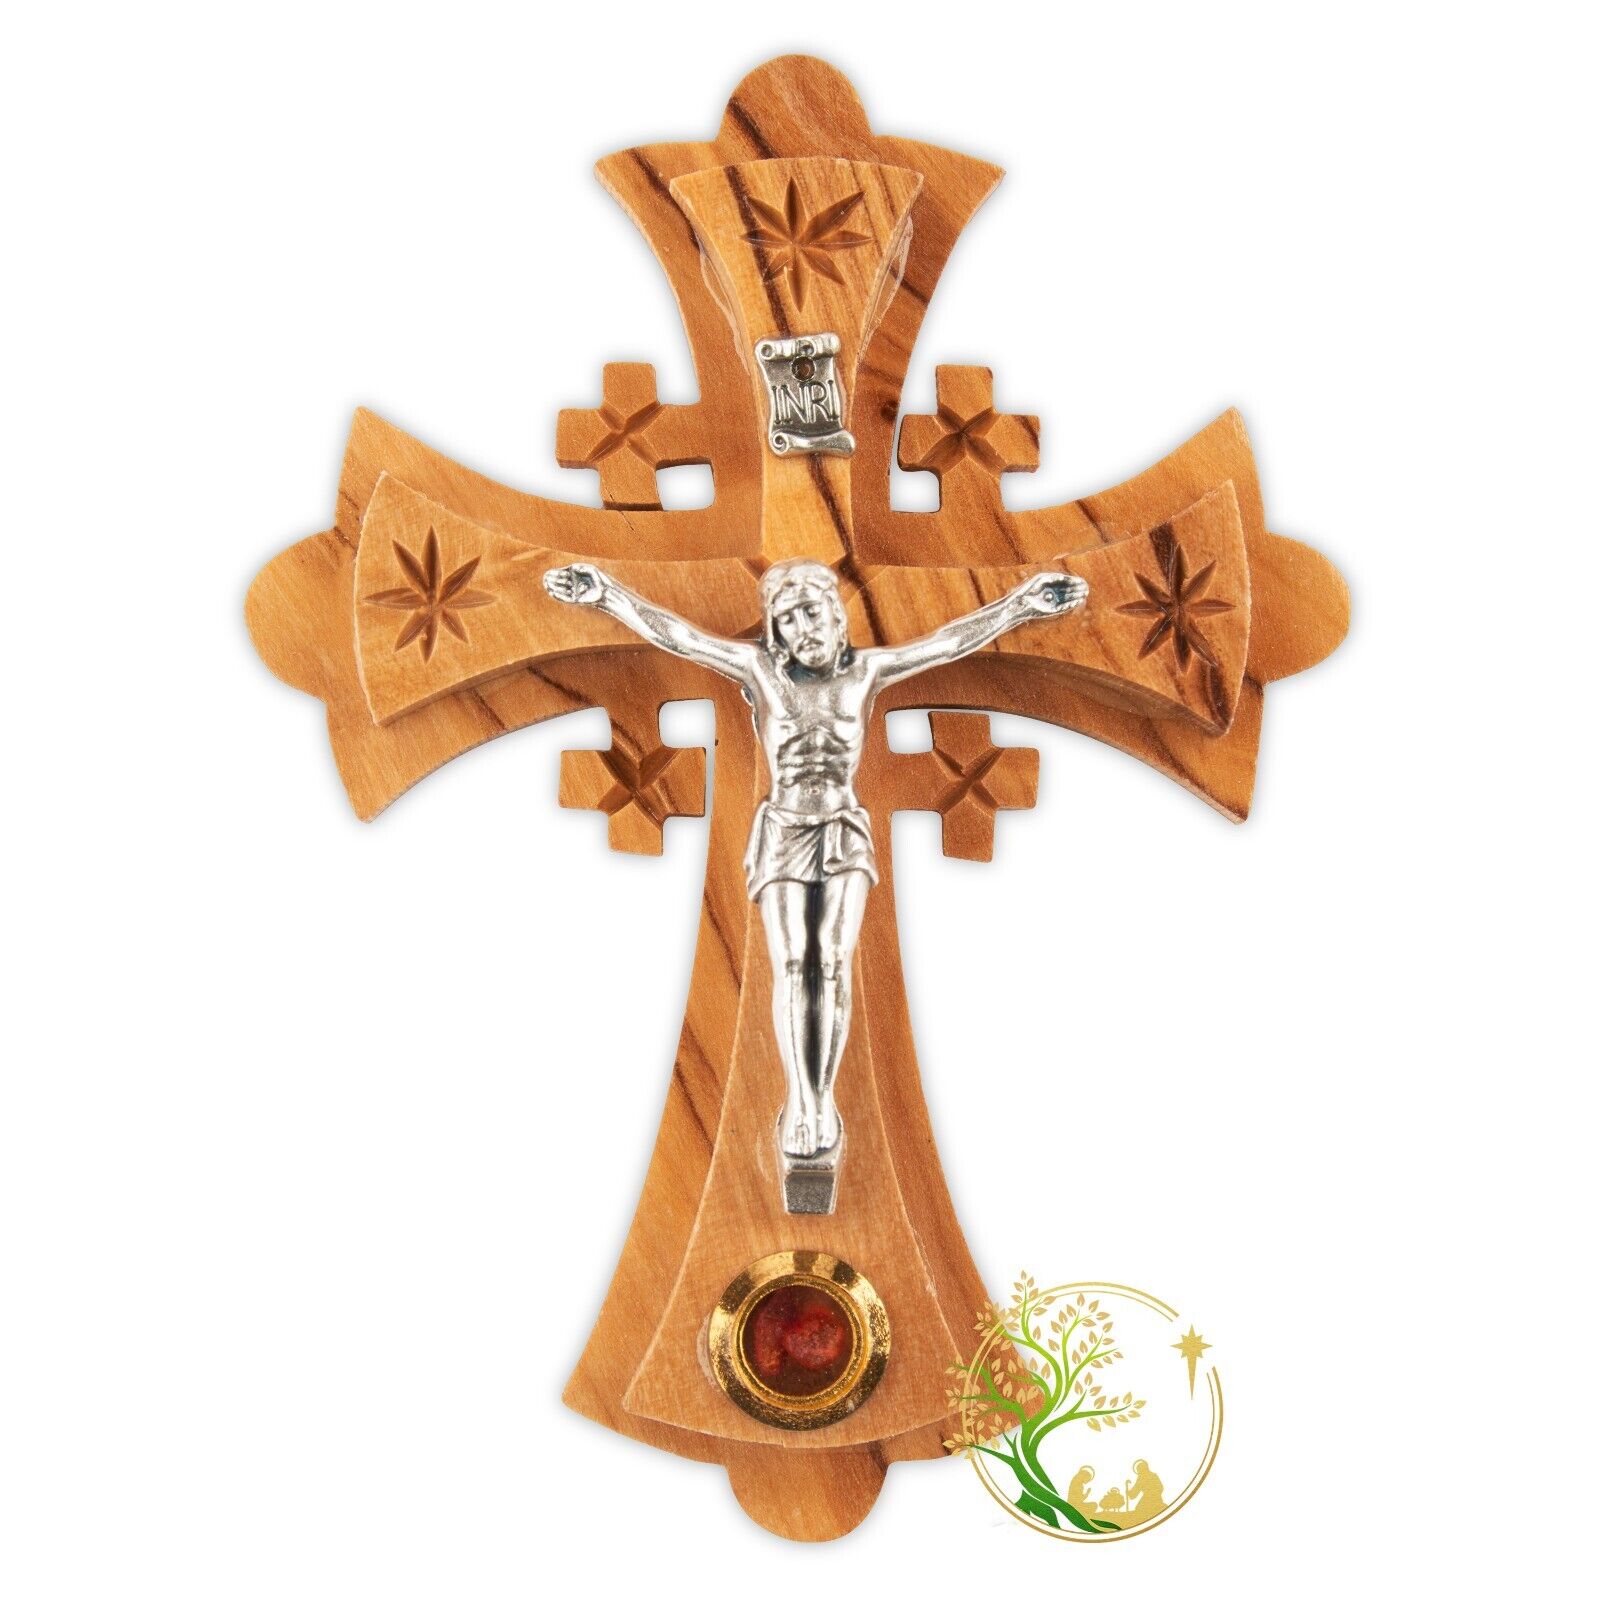 Wall crucifix from Bethlehem -Small crucifix cross gift from the Holy Land